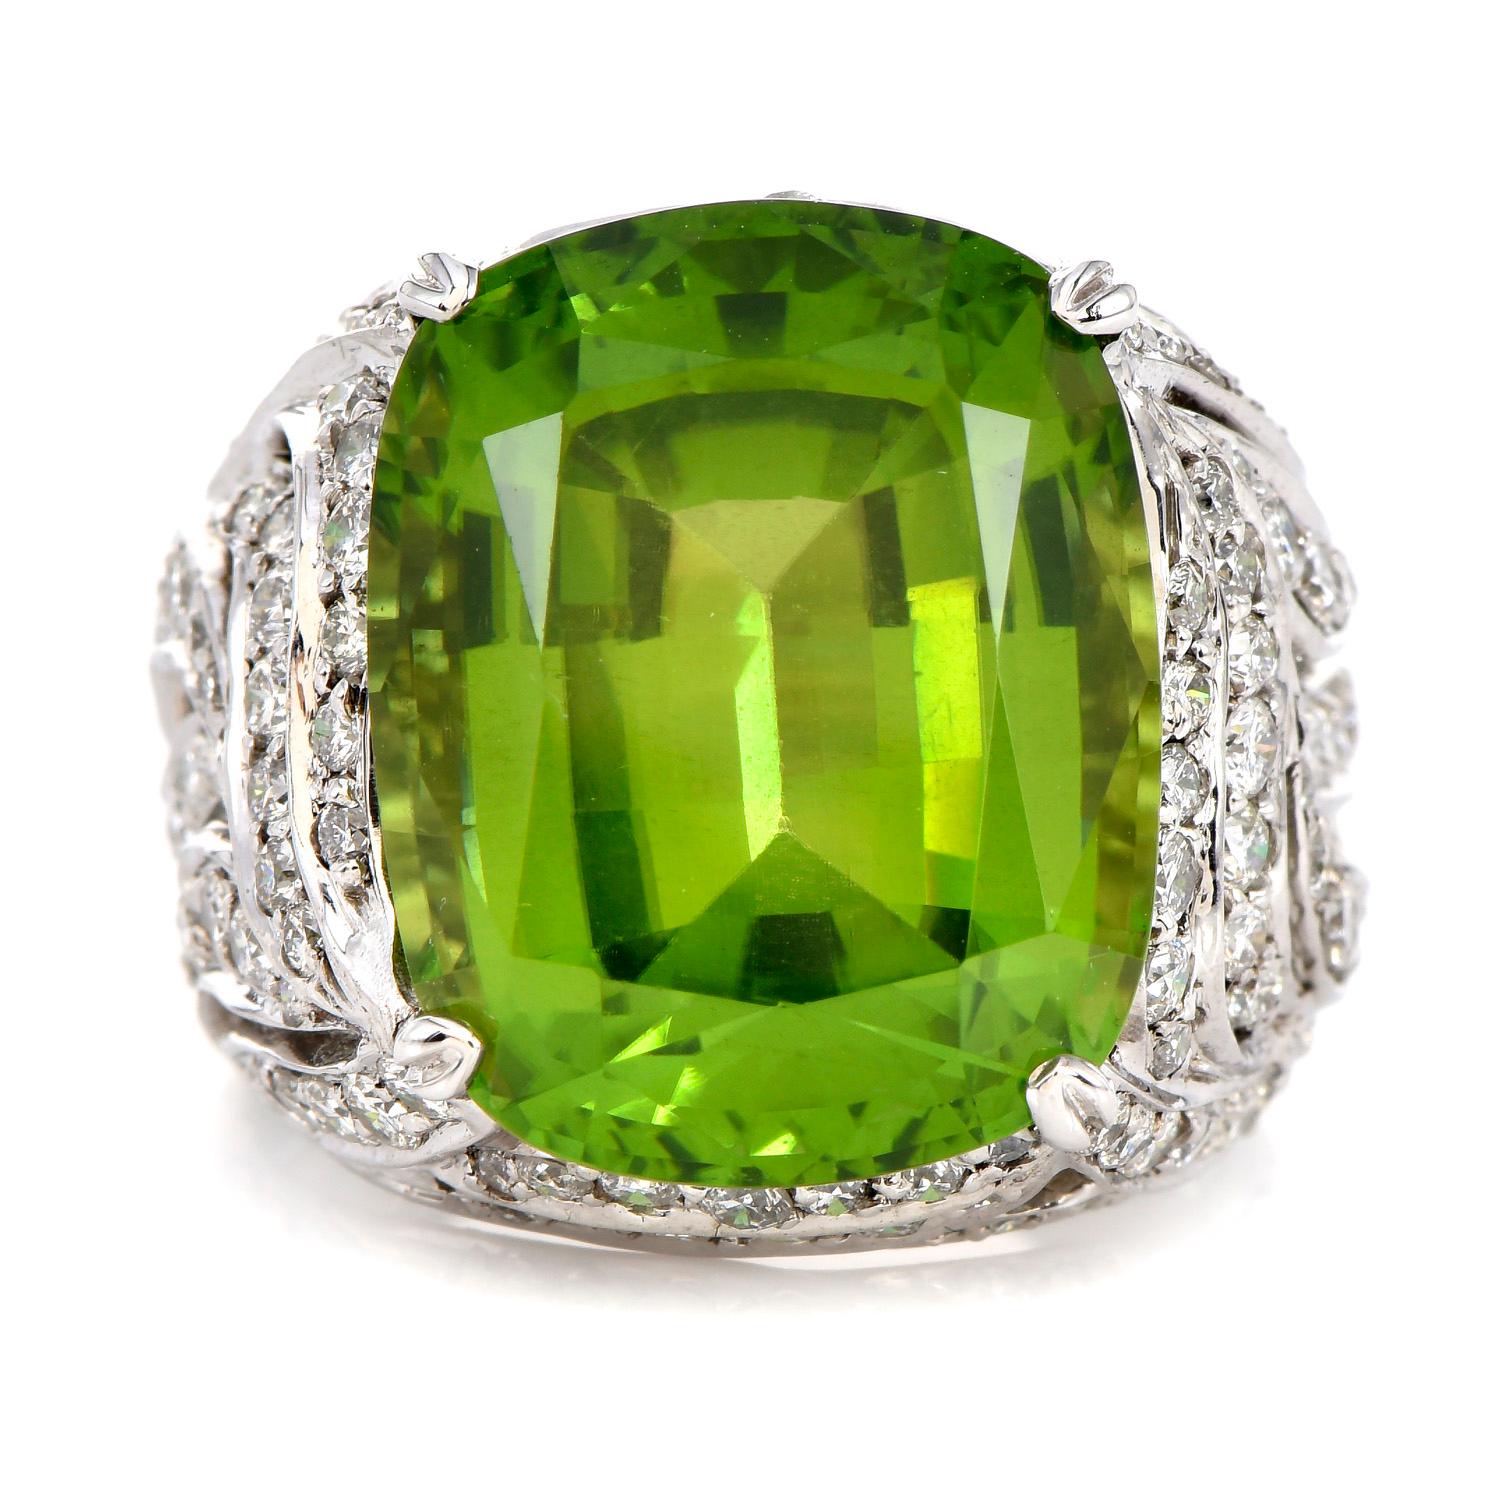 THIS 1980'S  Diamond & Peridot Ring is inspired in a Leaf Open design and crafted in solid 18K White Gold.Prominently featured in the center is approximately 18.00 carats Peridot, Cushion Cut, Prong Set. Surrounding the piece, there are  100